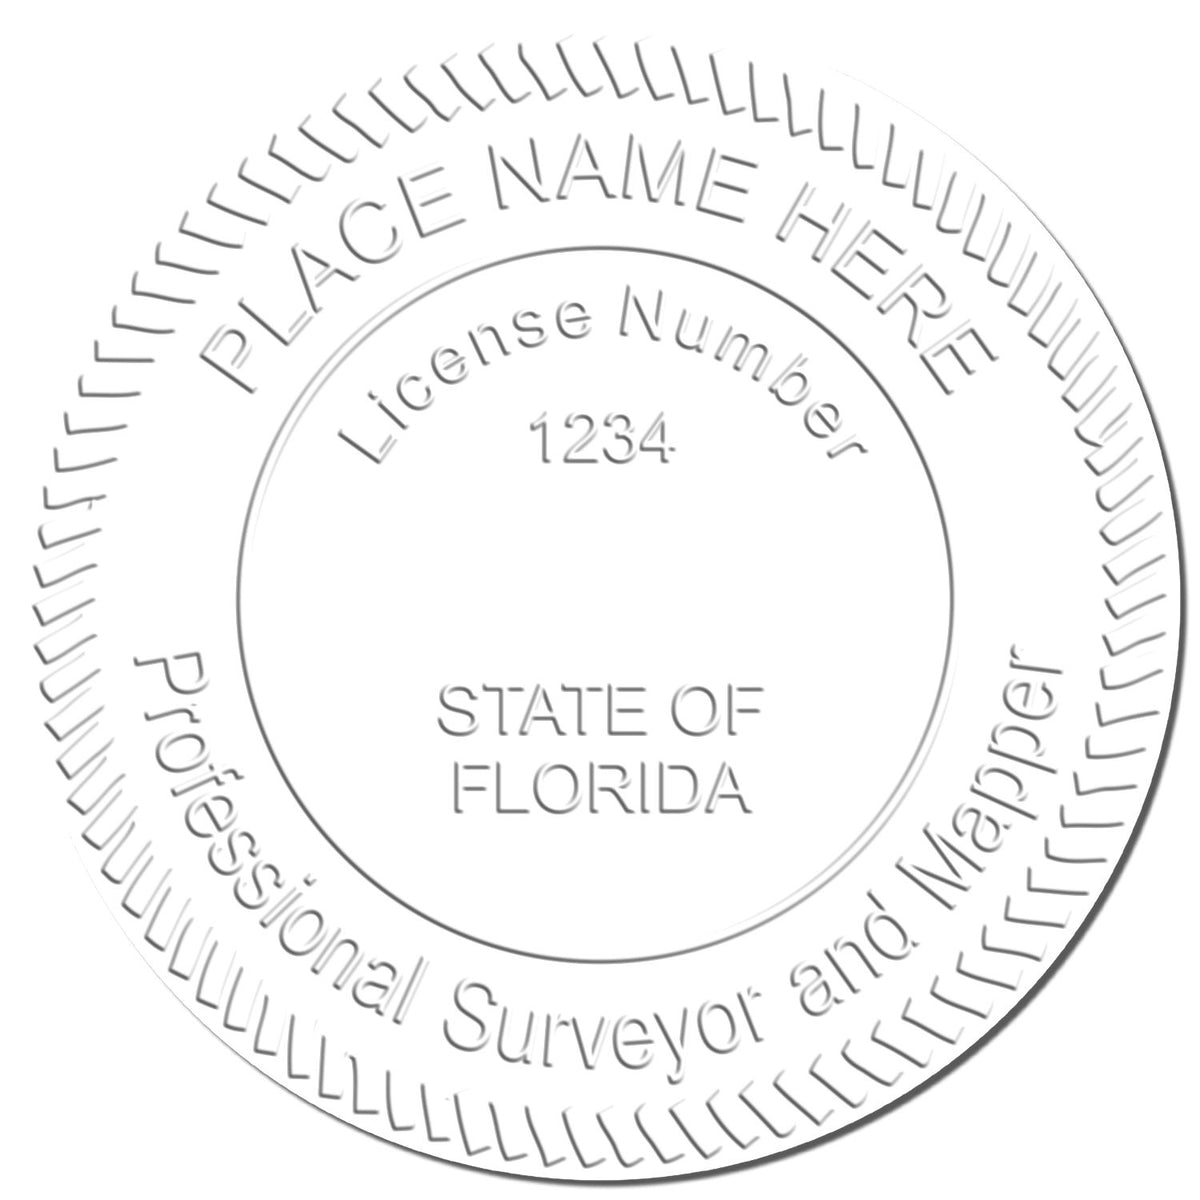 This paper is stamped with a sample imprint of the Long Reach Florida Land Surveyor Seal, signifying its quality and reliability.